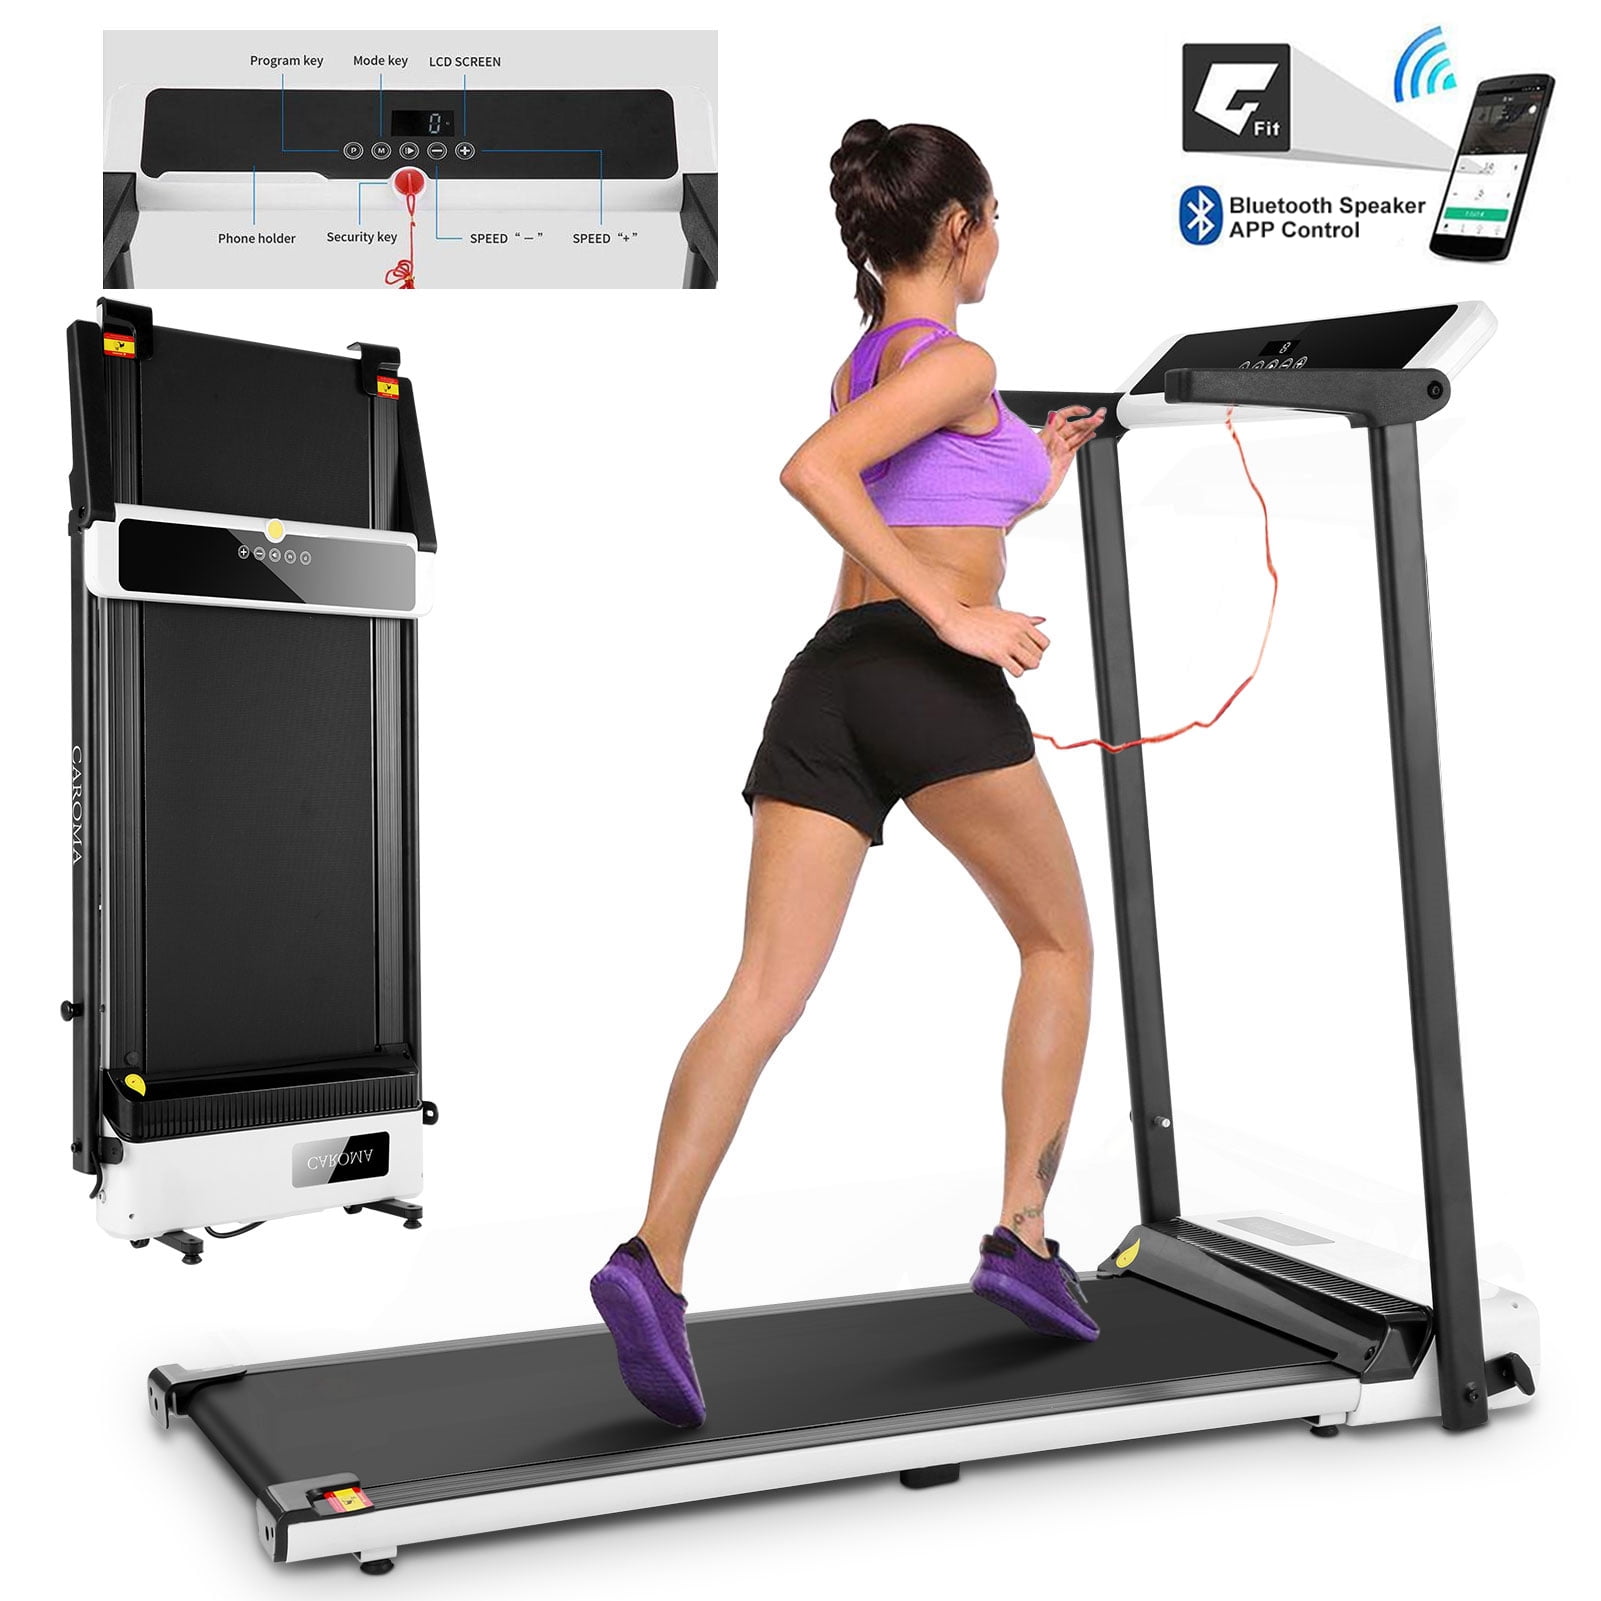 LCD Display Details about   Home/Gym Treadmill 2.5HP Electric Motorized Folding Running Machine 